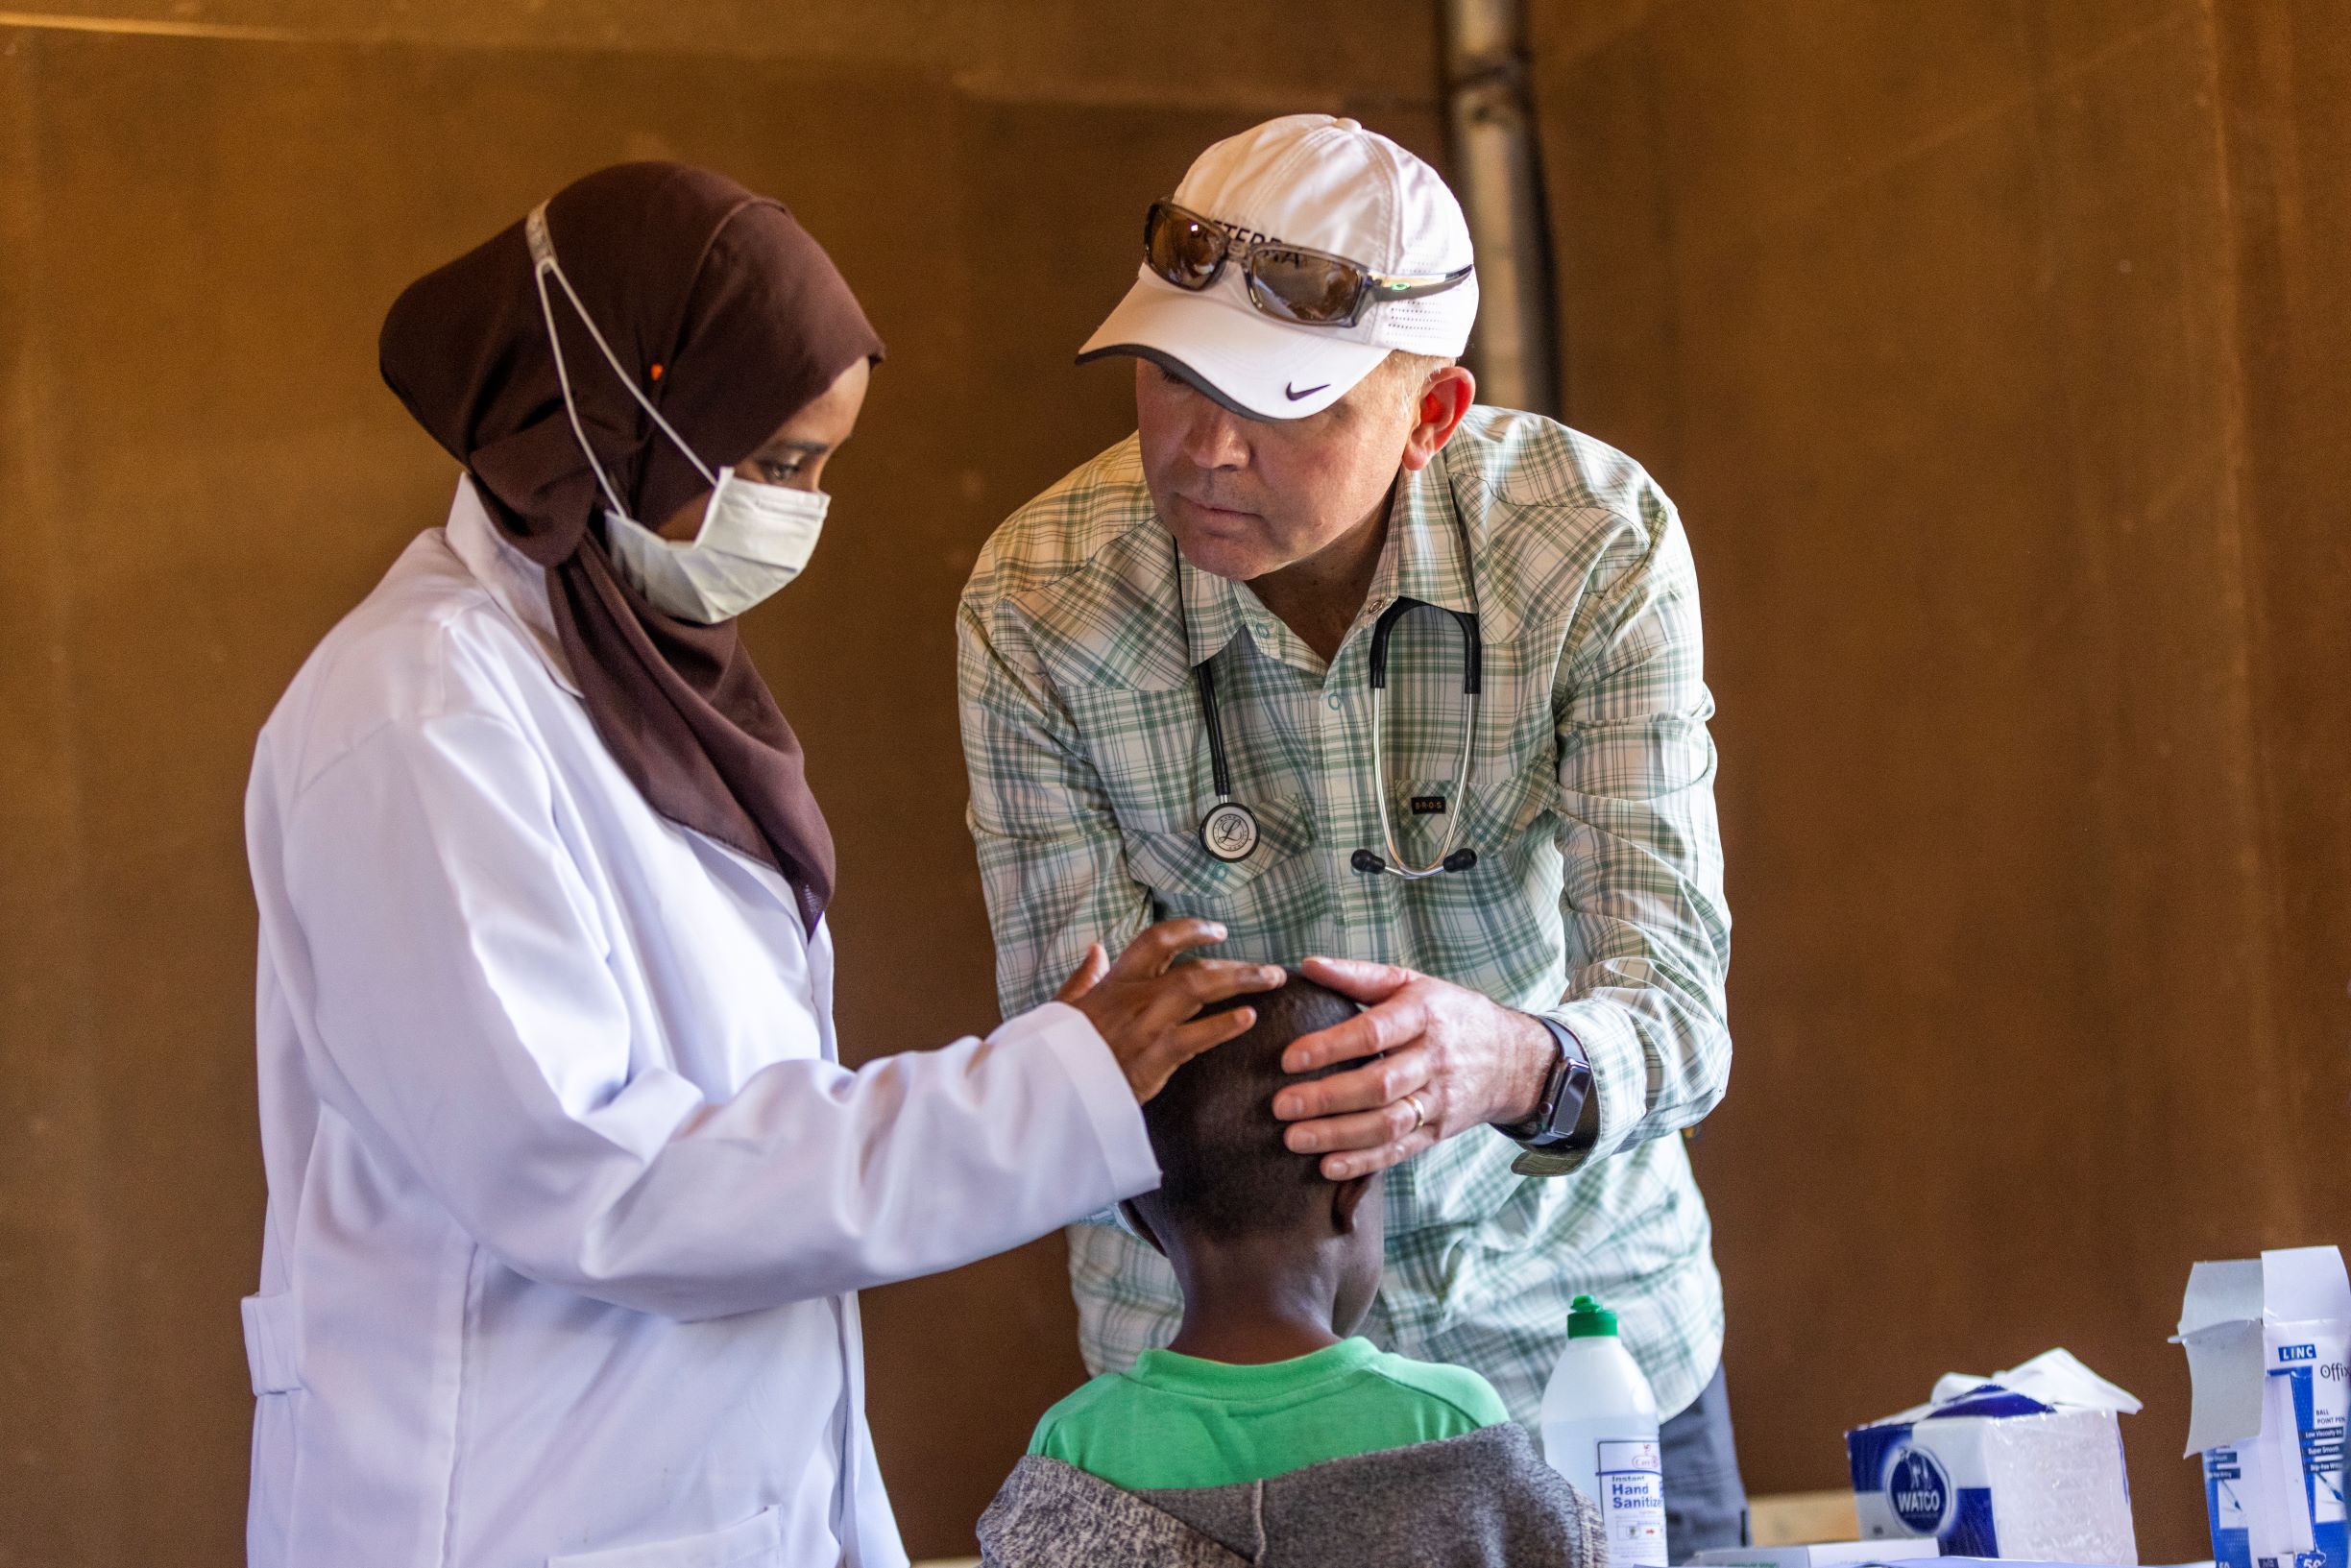 Dr. Osguthorpe assesses a child while training a local doctor.